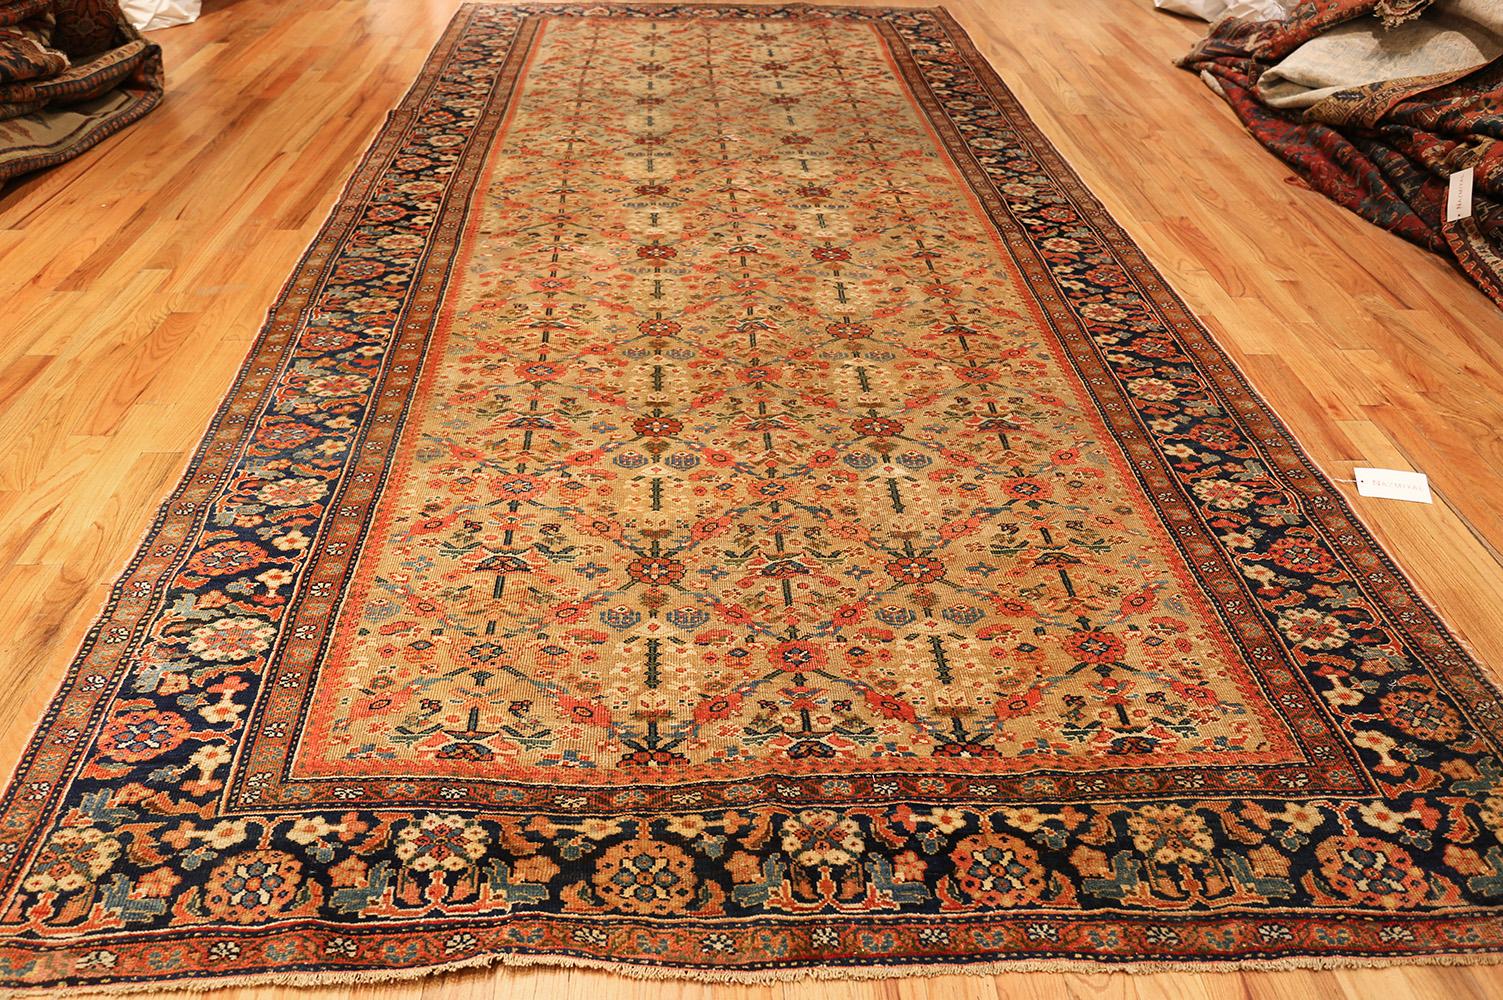 Breathtaking yellow background antique Sultanabad Persian rug, country of origin/rug type: Persian rug, circa 1900. Size: 7 ft 3 in x 15 ft (2.21 m x 4.57 m)

